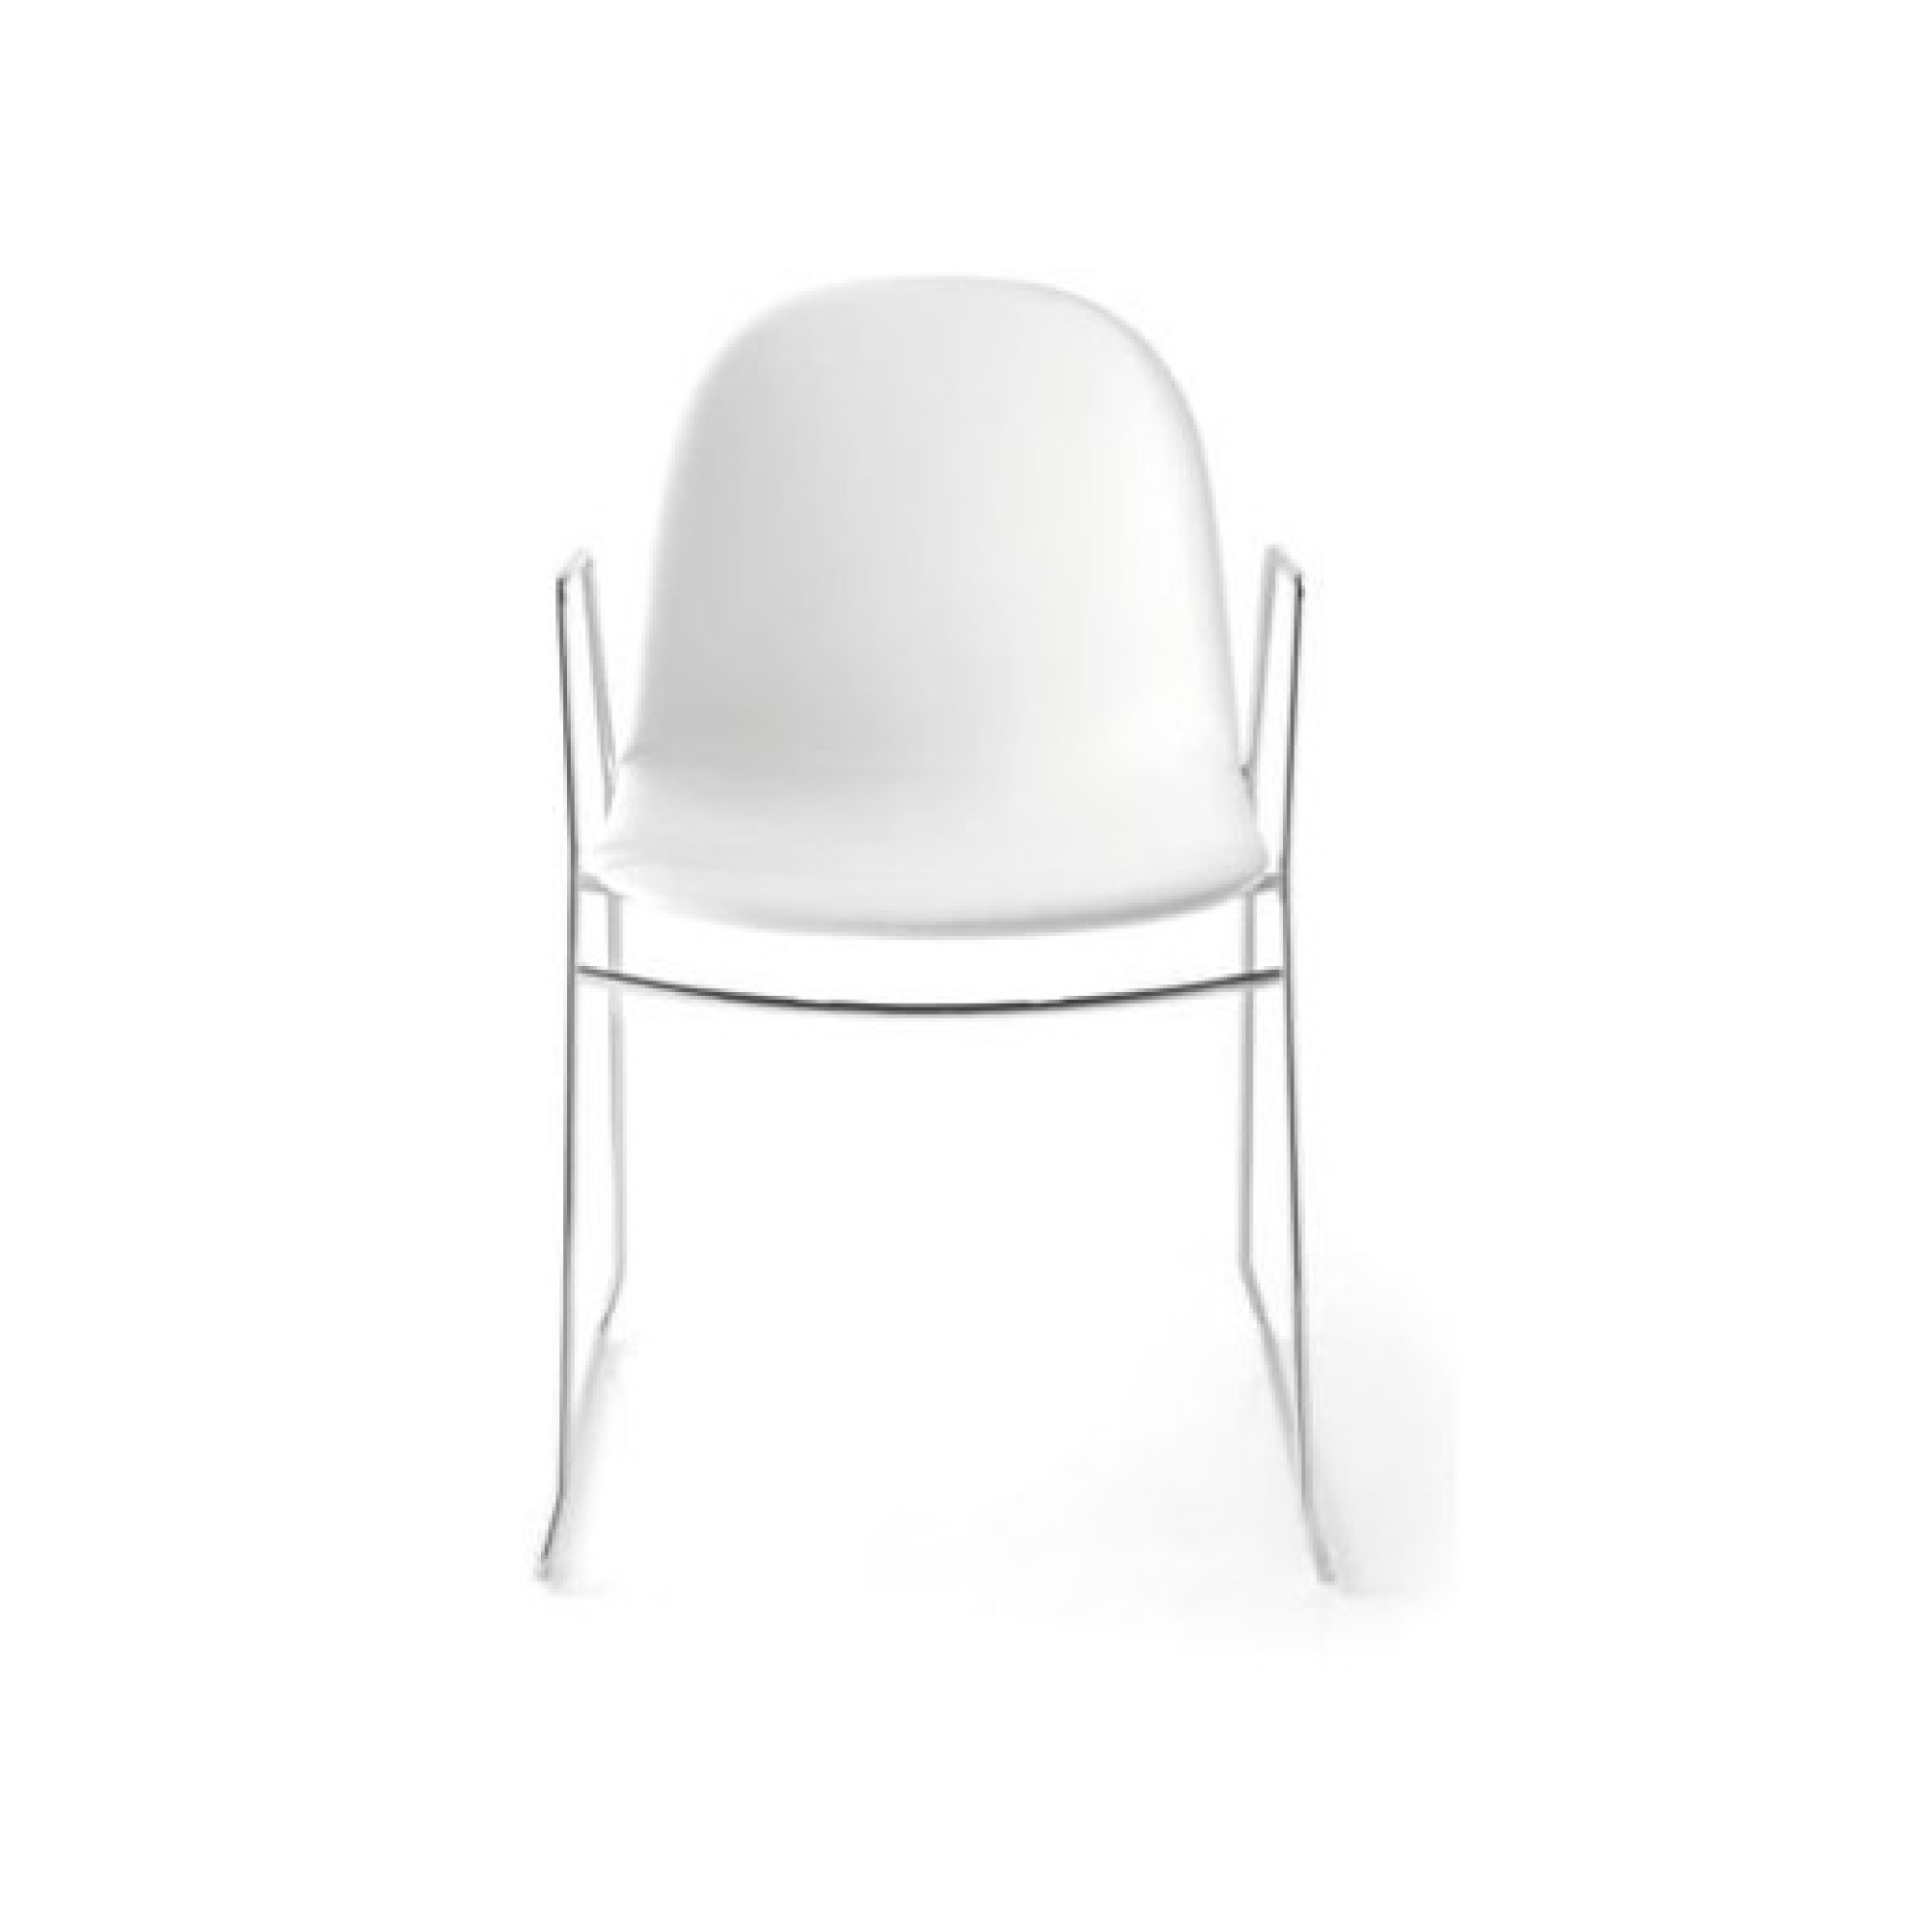 CB/1697 COVERED ARMRESTS CHAIR WHIT ACADEMY